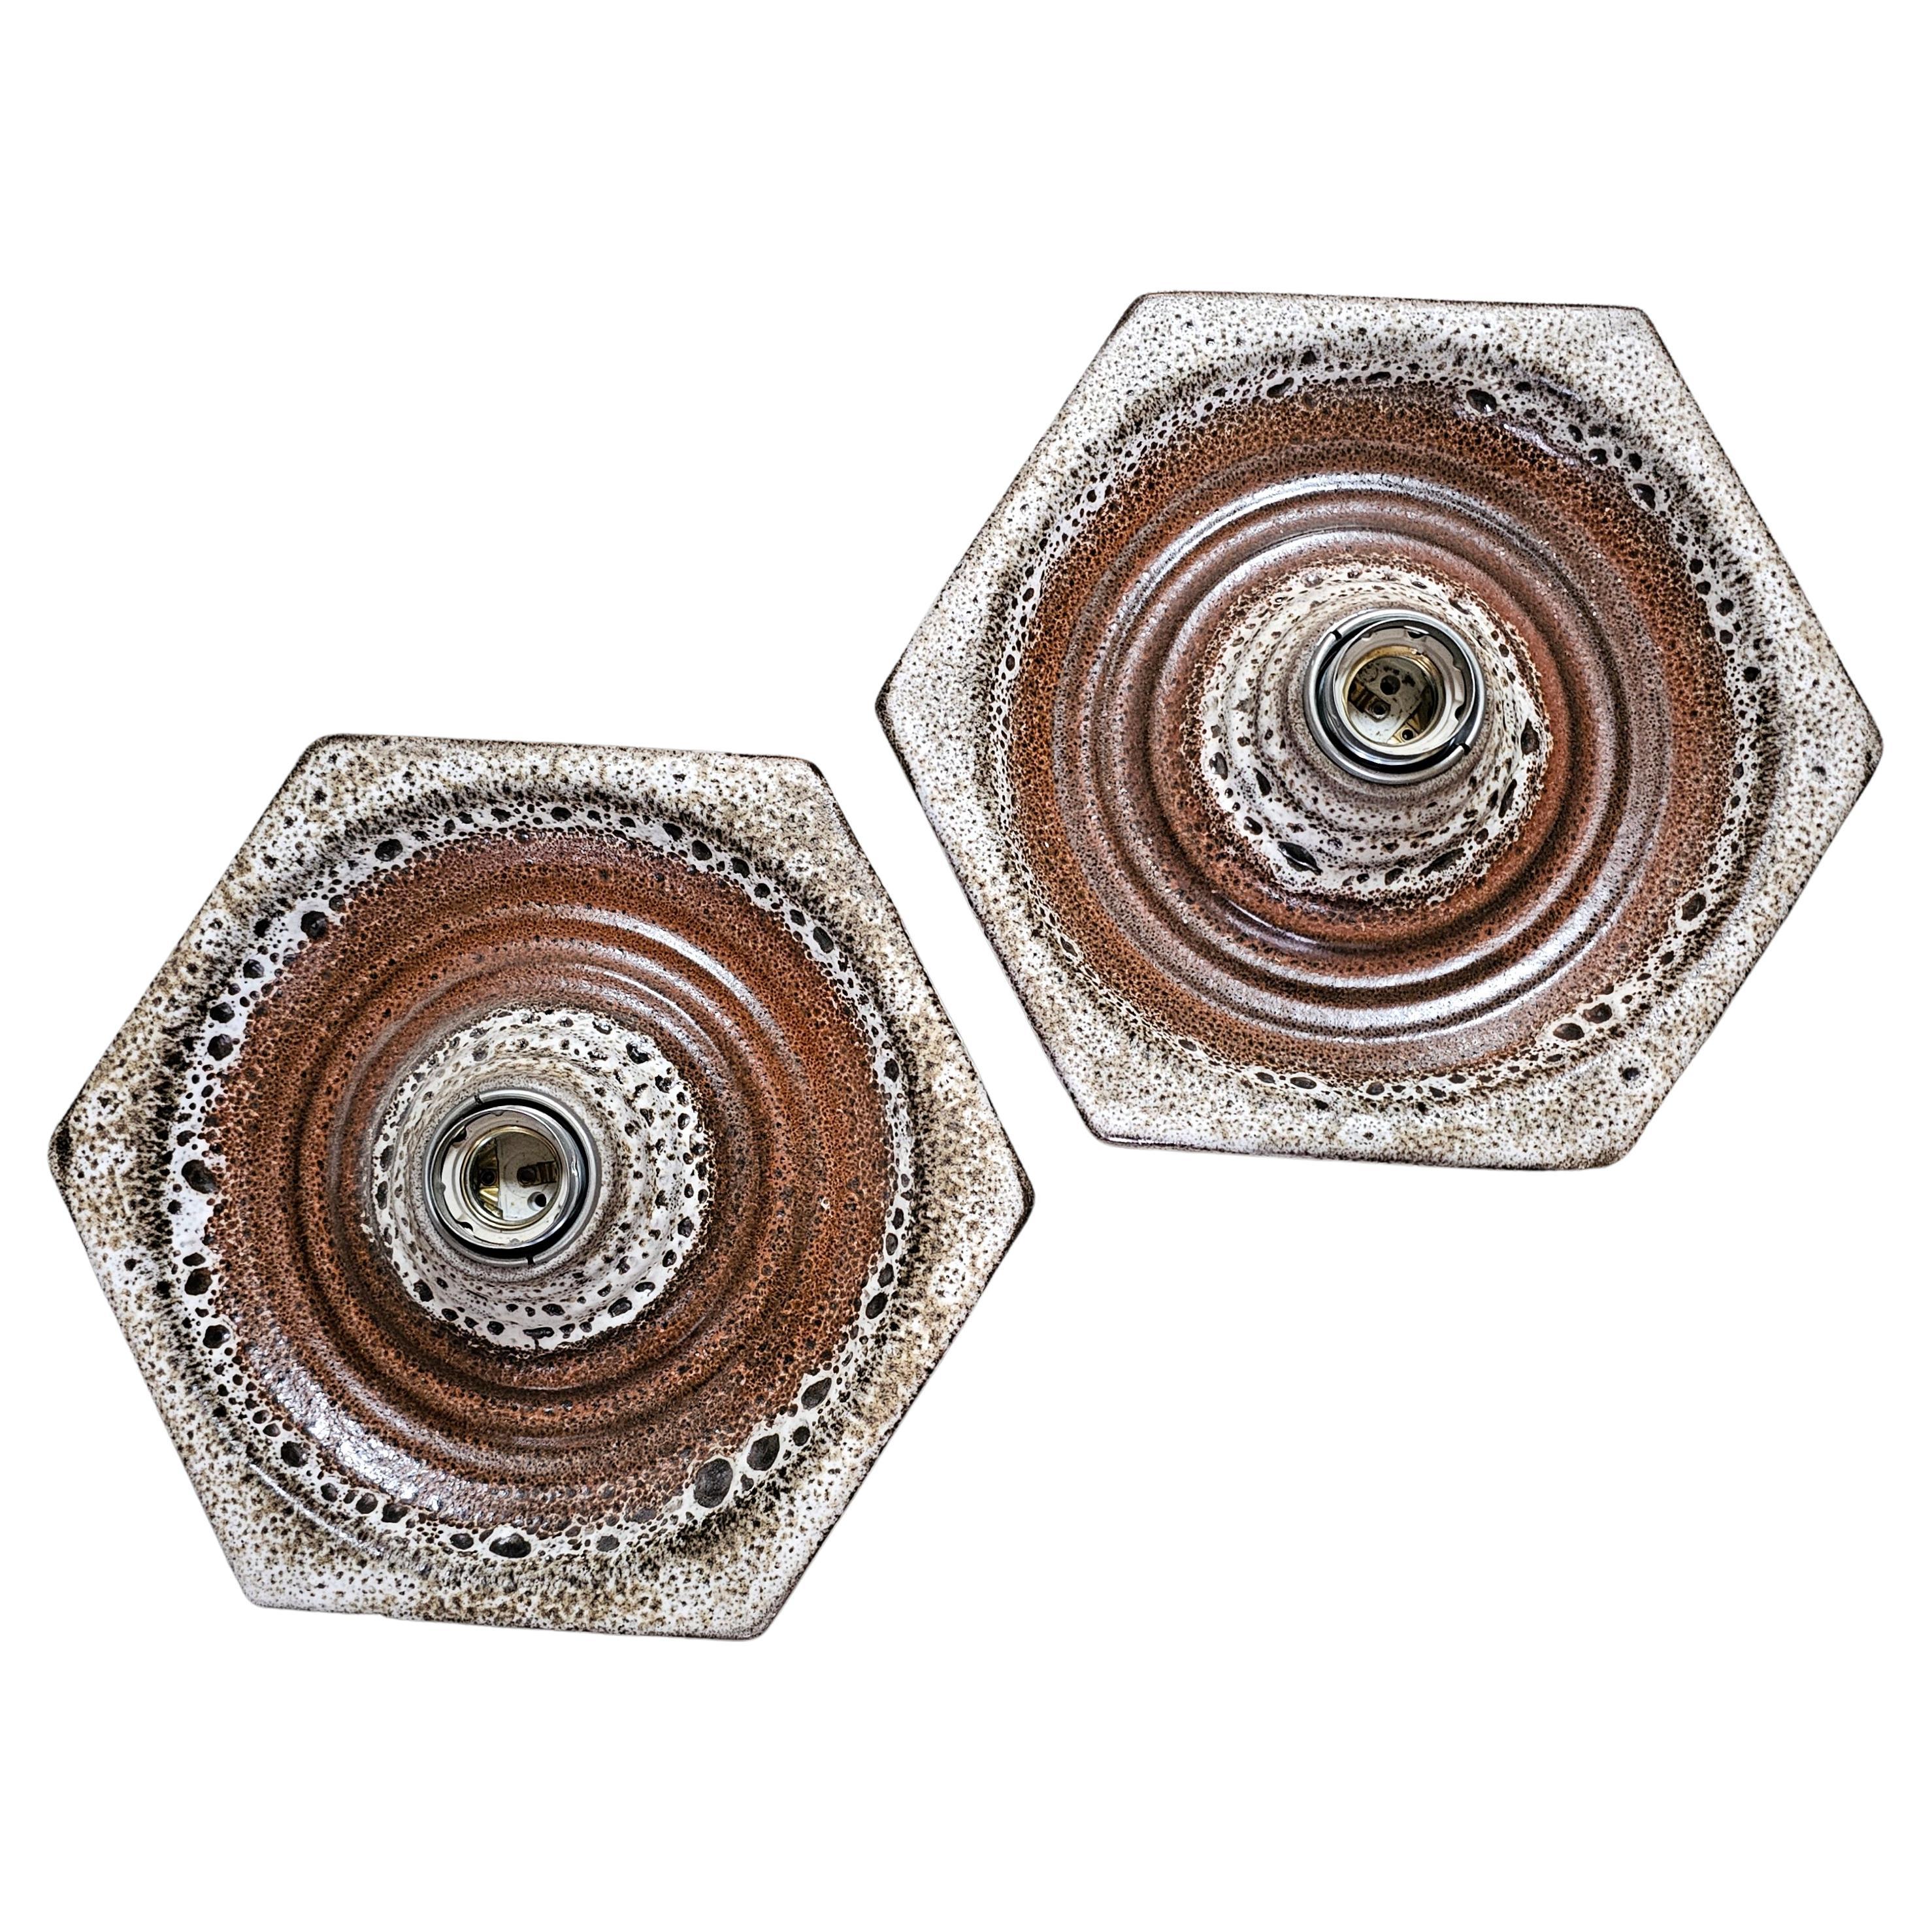 Pair of Mid Century Modern Hexagonal Fat Lava Sconces, West Germany 1970s For Sale